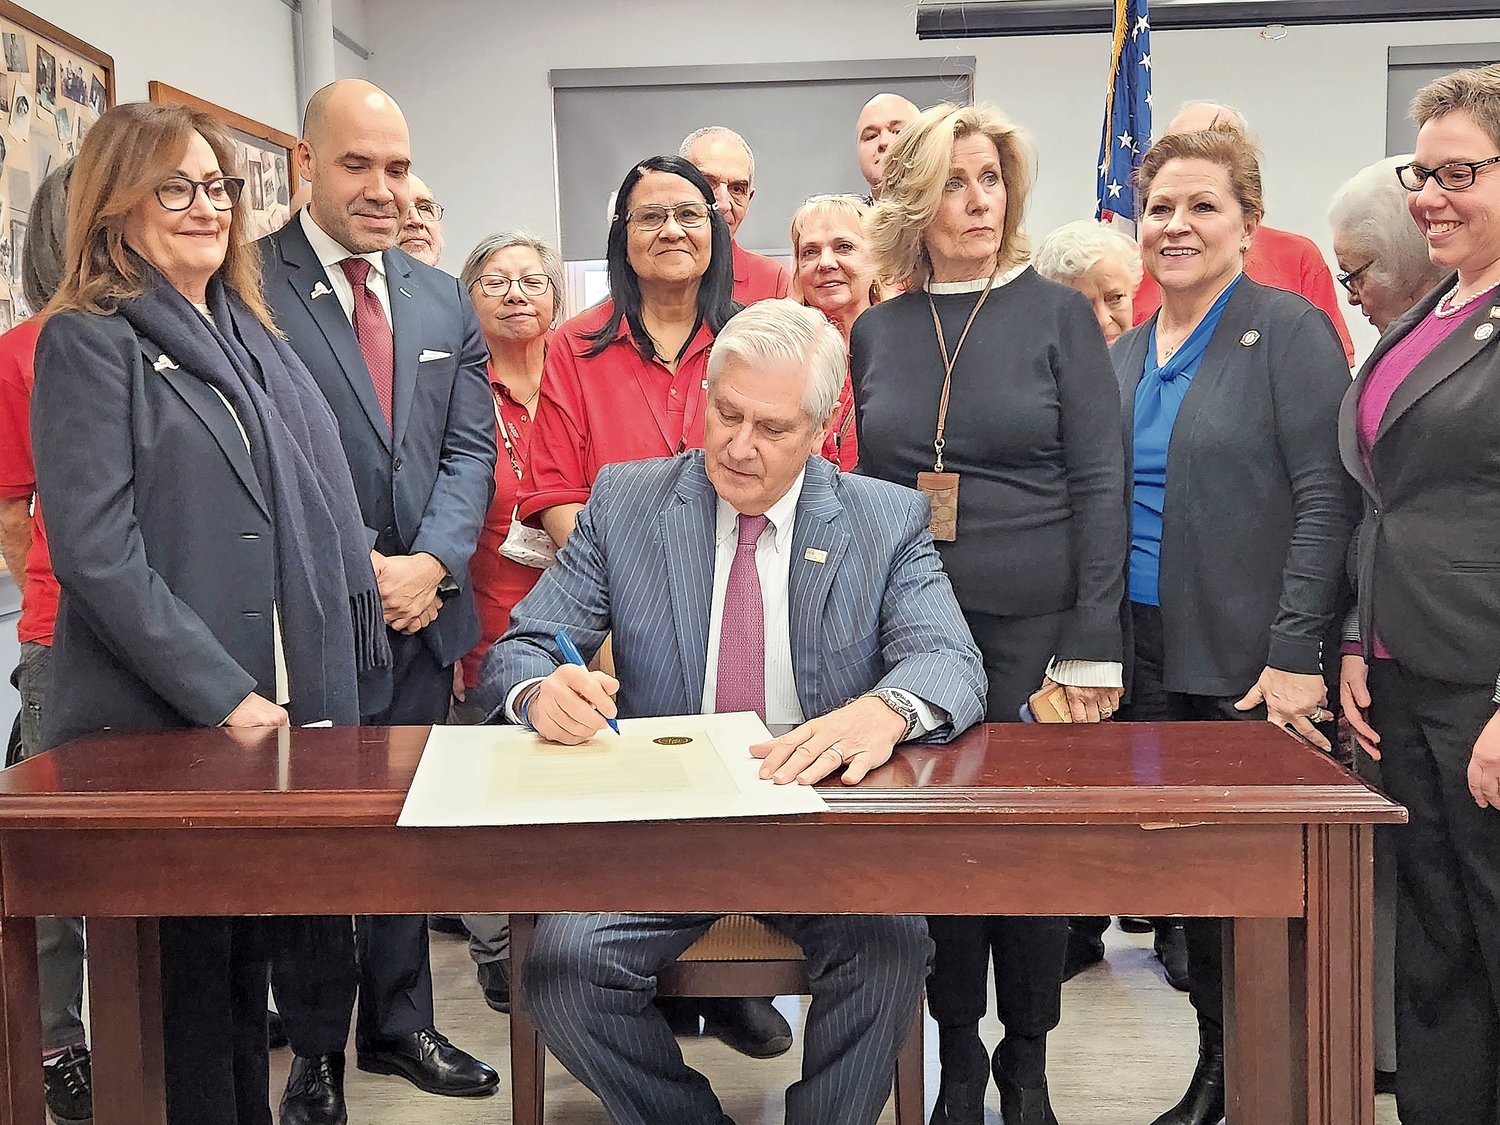 Nassau County Executive Bruce Blakeman signed a proclamation at the Glen Cove Senior Center authorizing each county department to appoint liaisons to assist senior citizens. He also helped the center obtain a fourth bus.